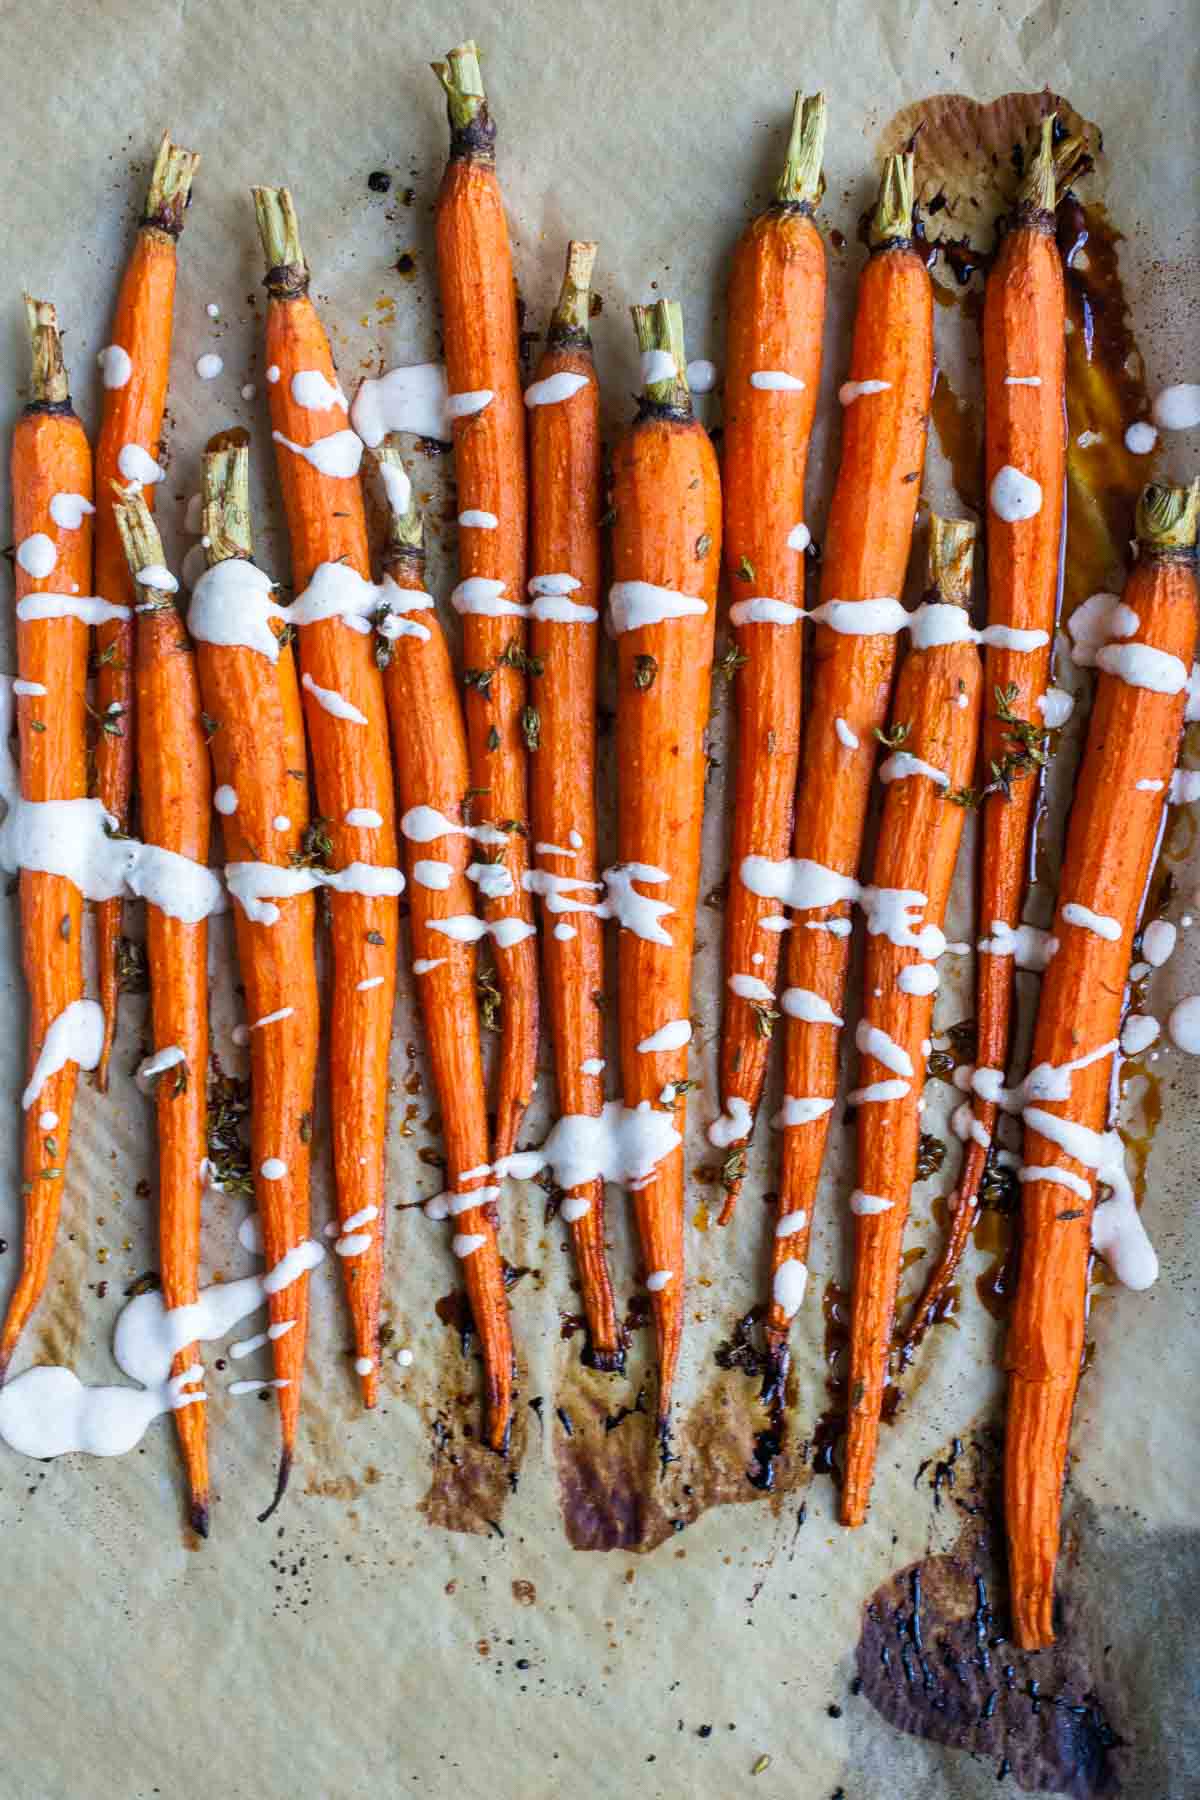 A piece of parchment paper with a line of roasted carrots with a white drizzle and brown baked parts on the parchment.